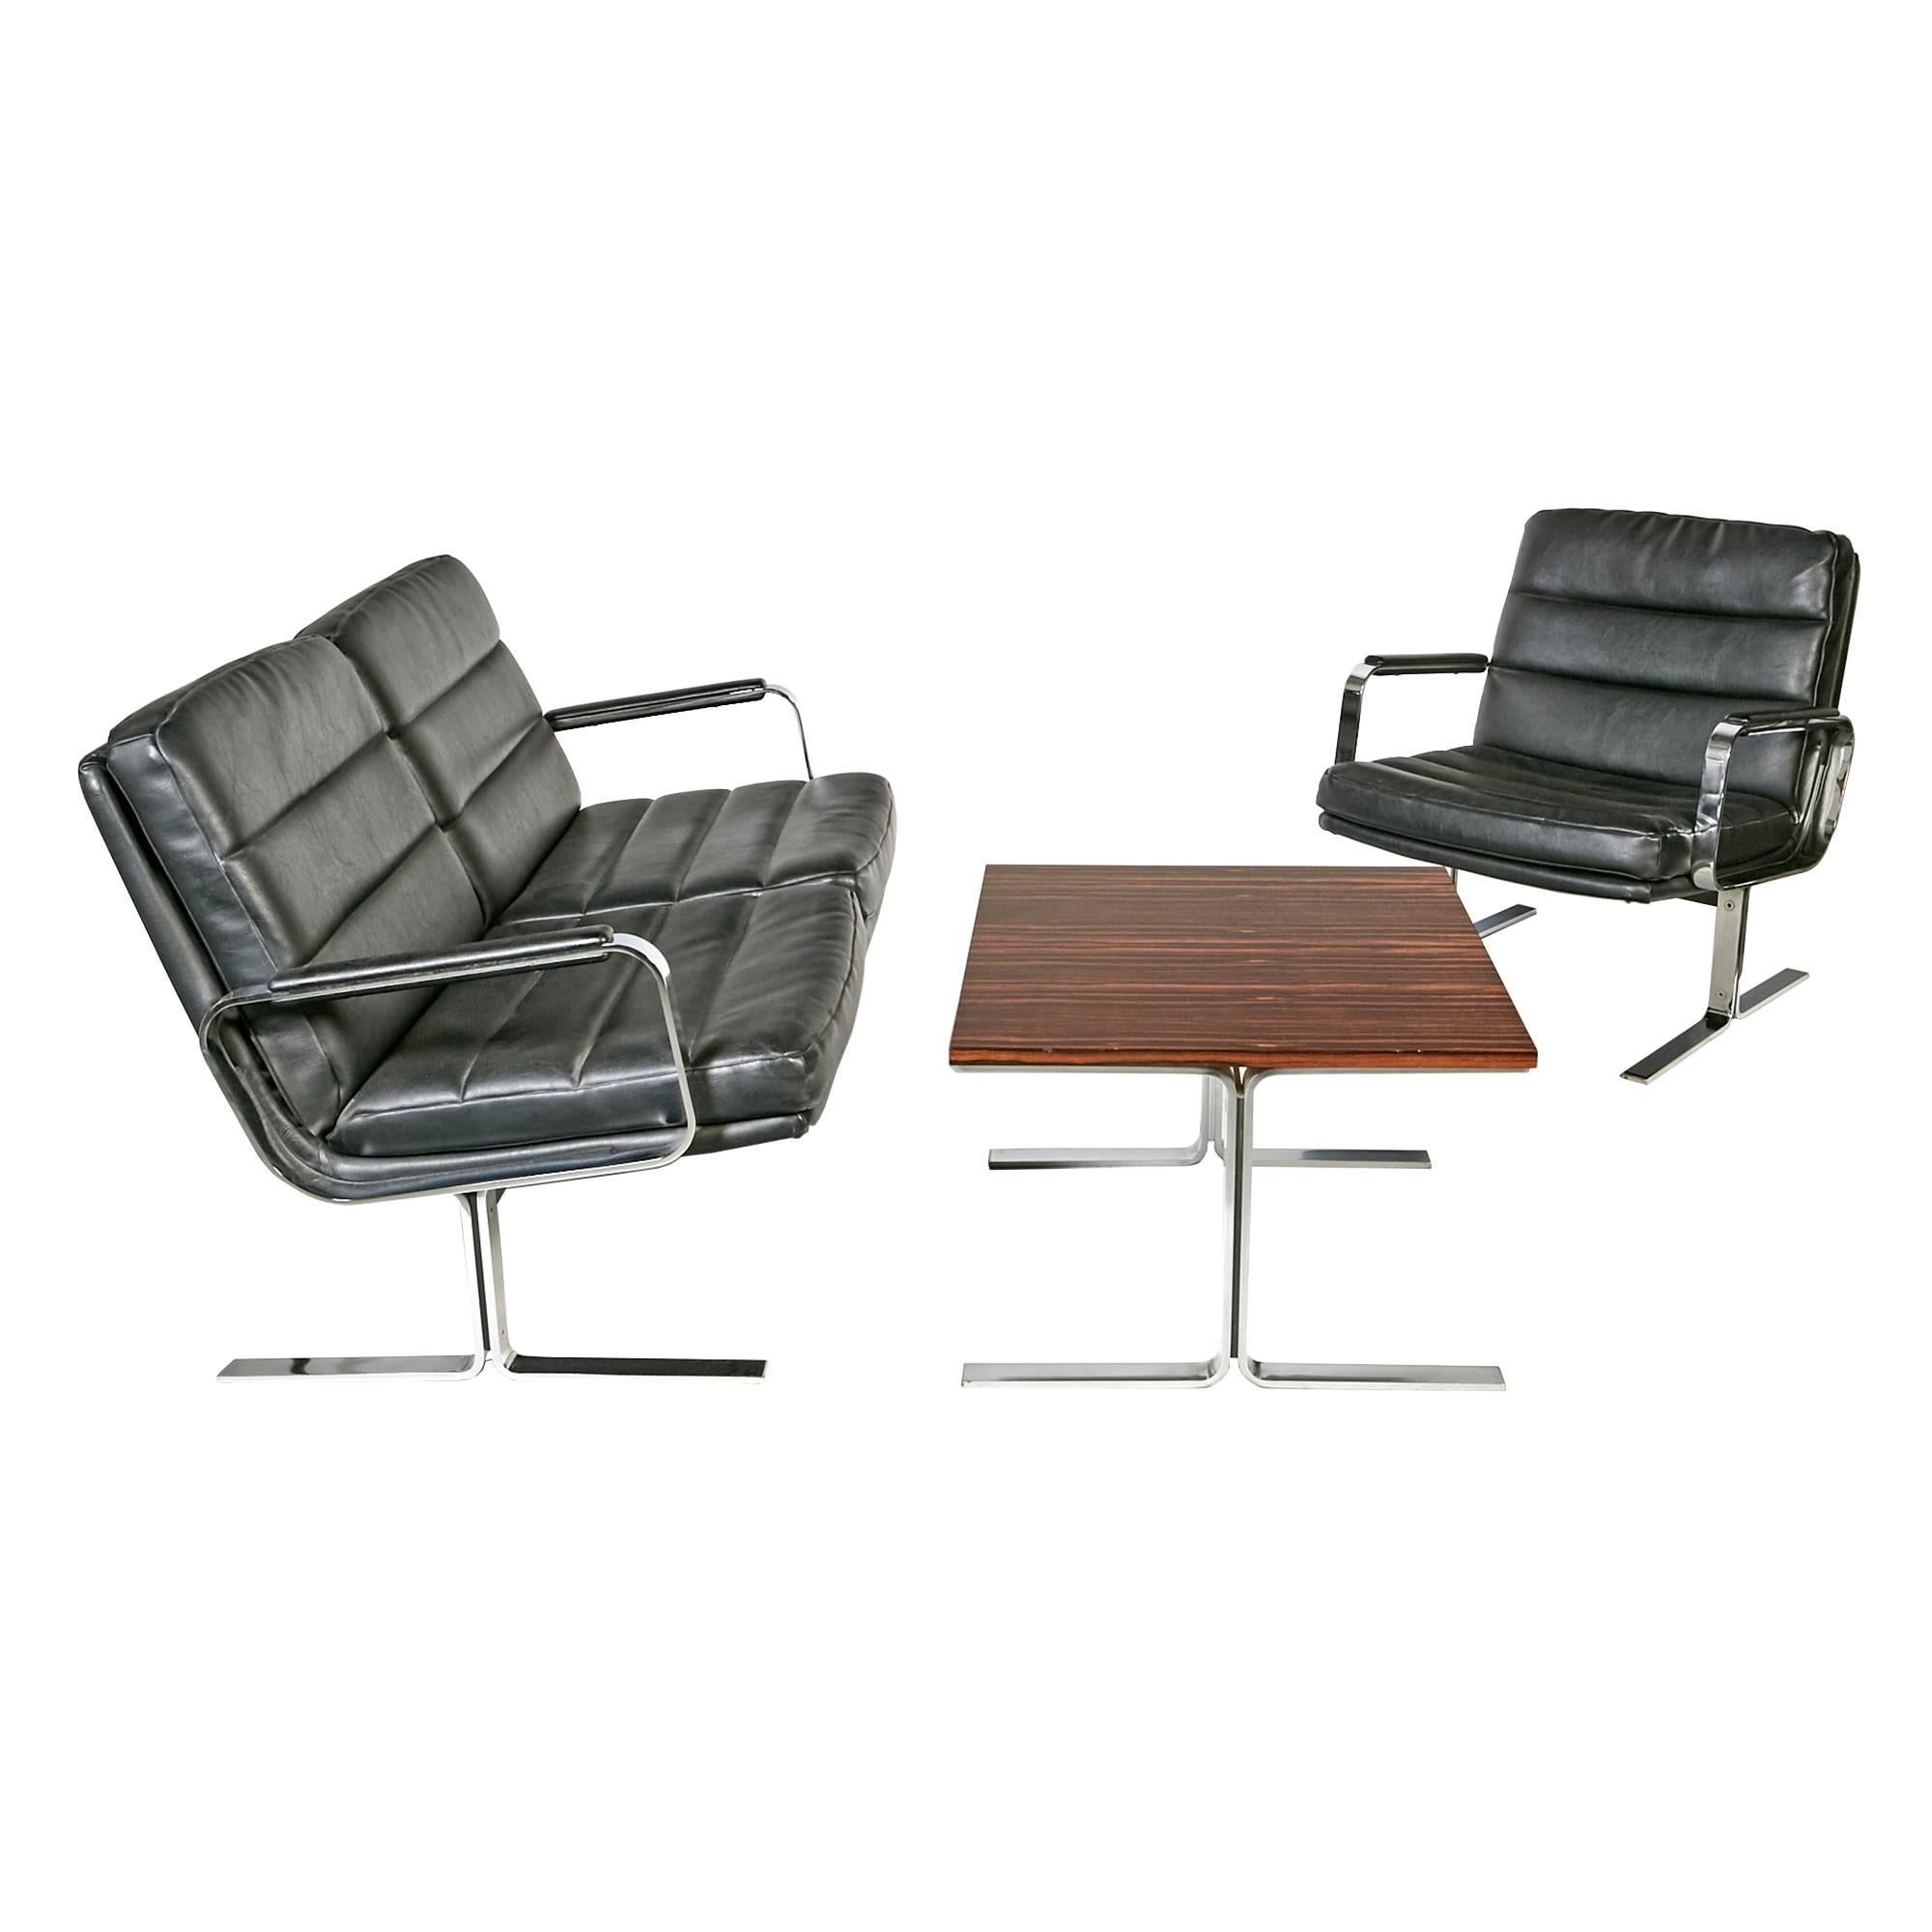 1970s Airport-Style Living Room Set by Bernd Münzebrock for Knoll For Sale